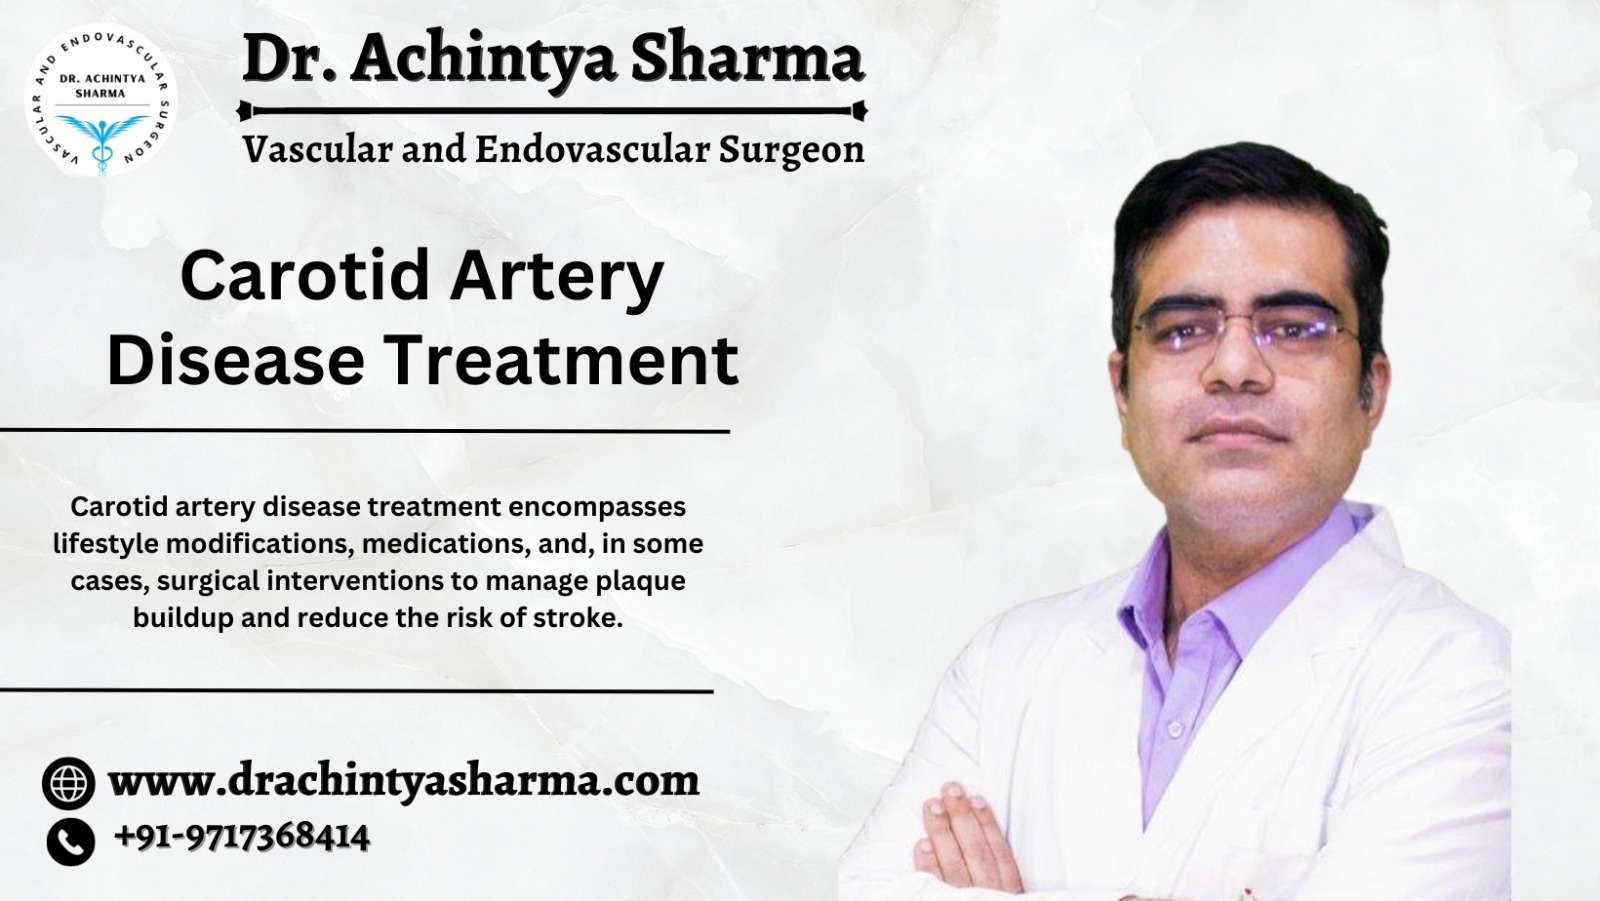 This is a very effective method for carotid artery disease treatment